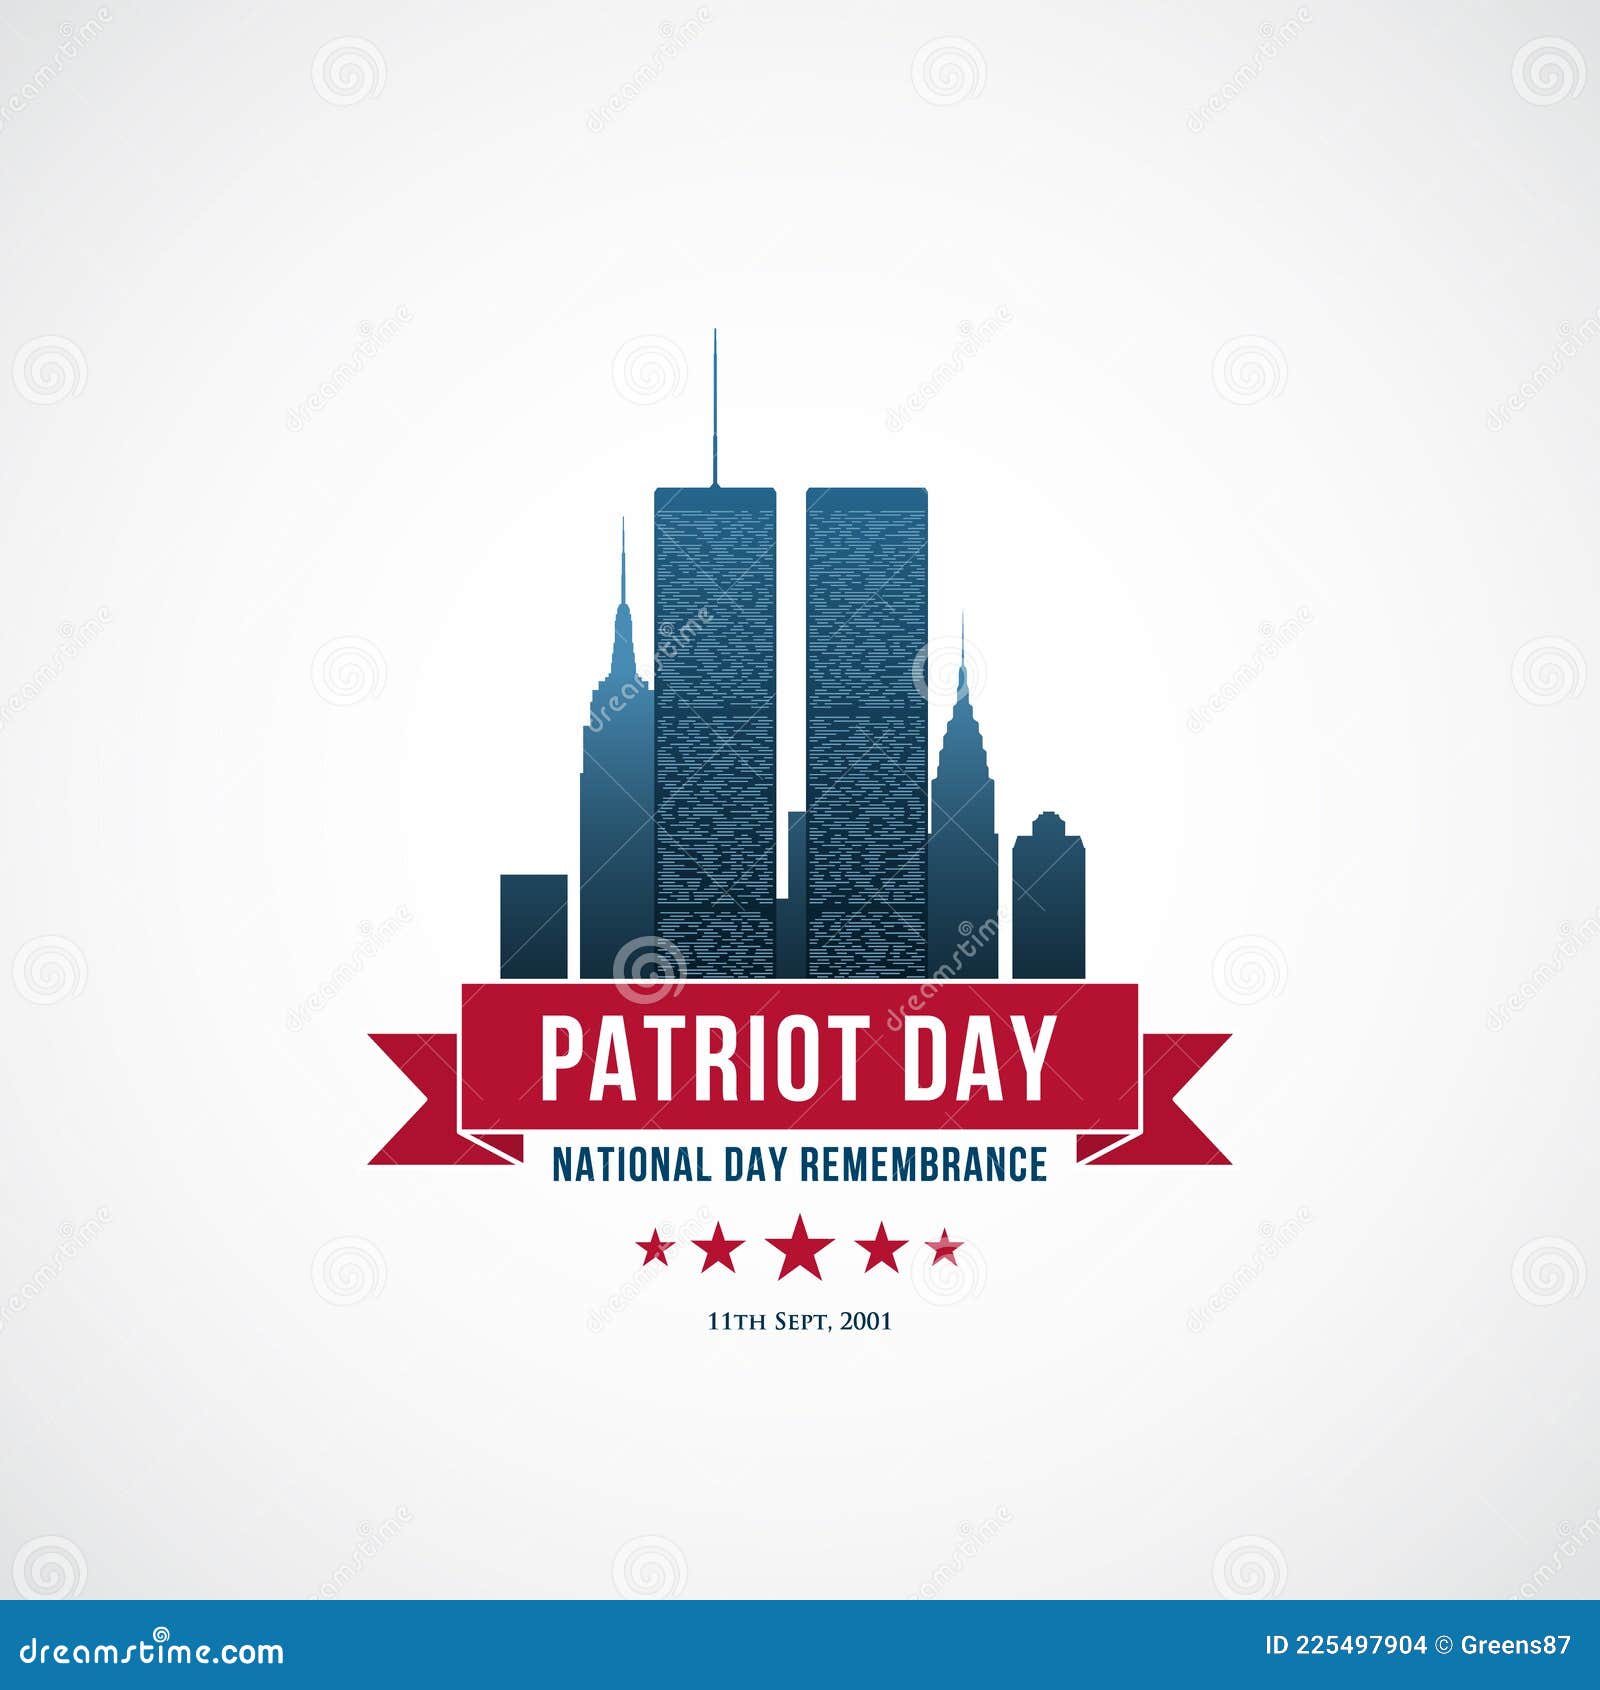 patriot day concept  with twin towers, red ribbon and text we will never forget.